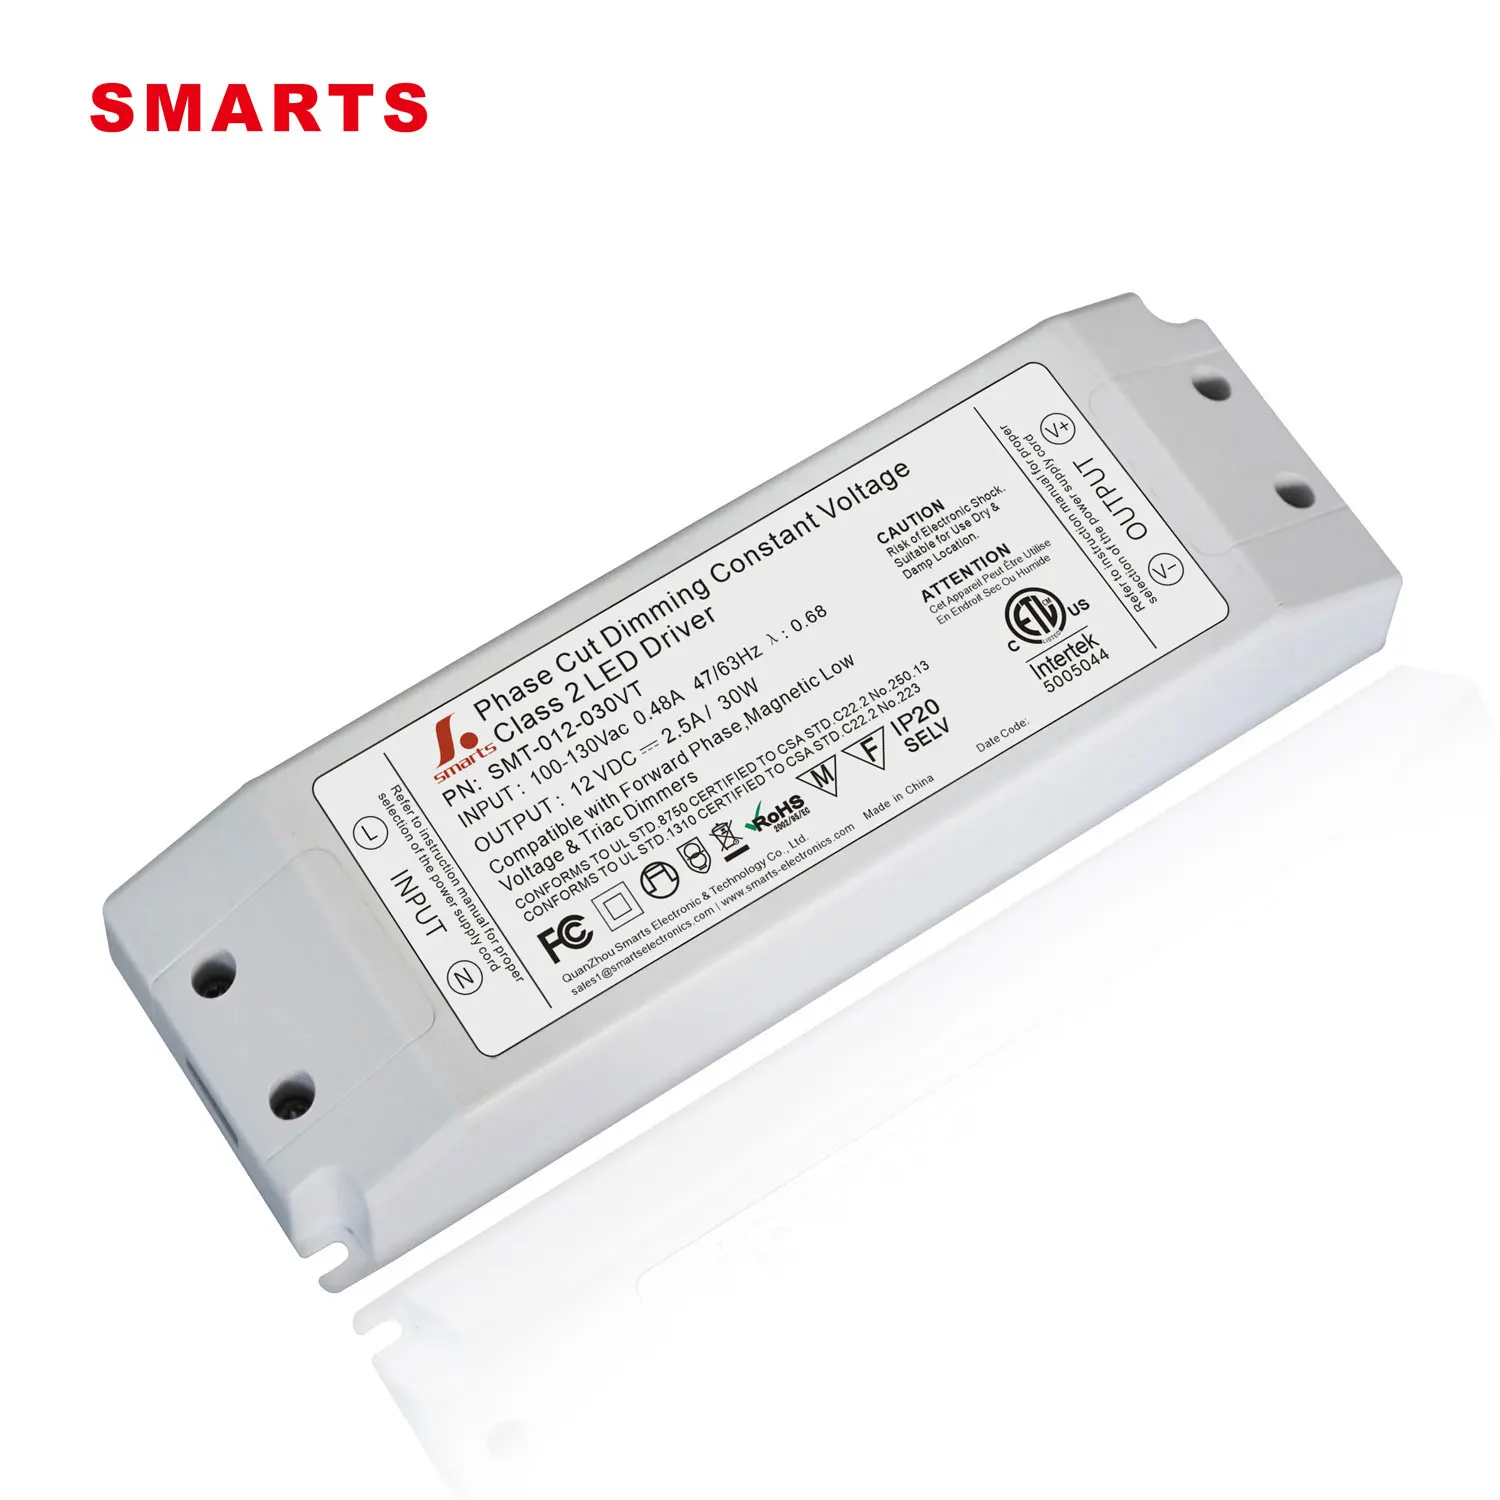 Ord bestøve med uret Source 12v triac dimmable led trafo 32w 30w dimmable led driver on  m.alibaba.com